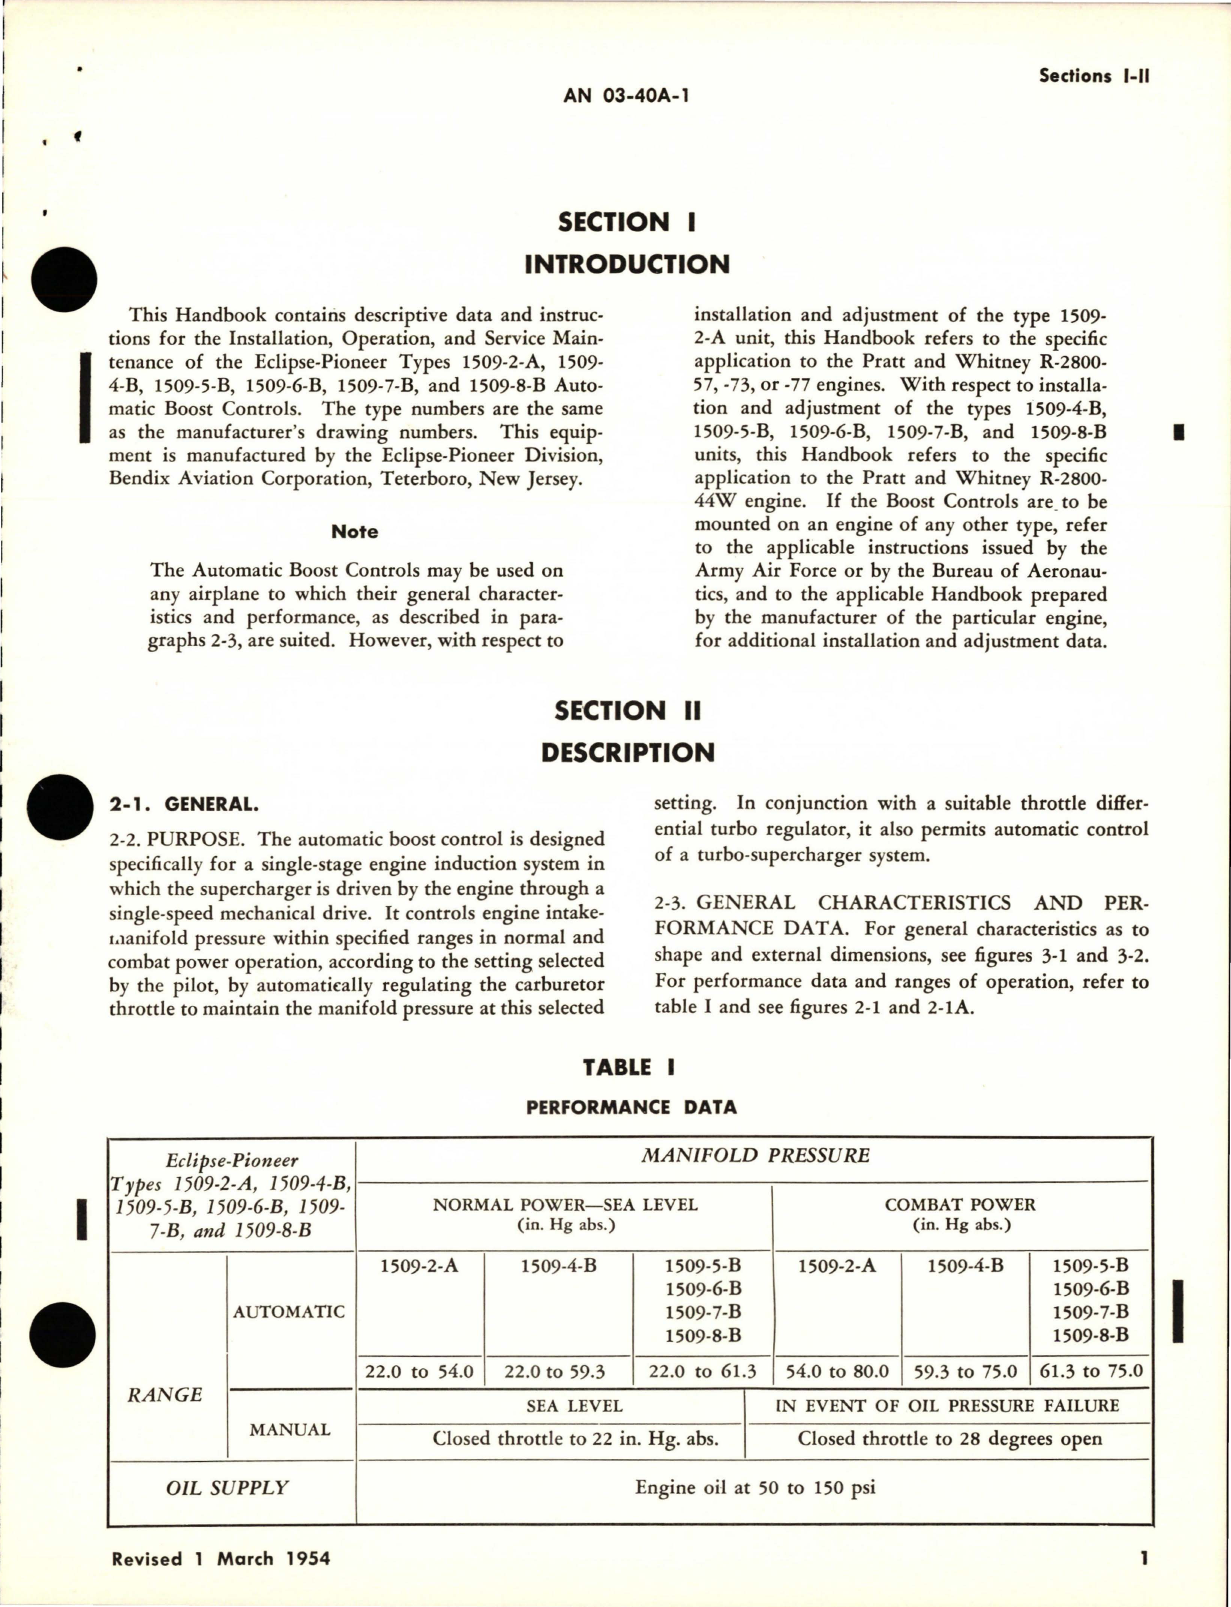 Sample page 5 from AirCorps Library document: Operation and Service Instructions for Automatic Boost Control